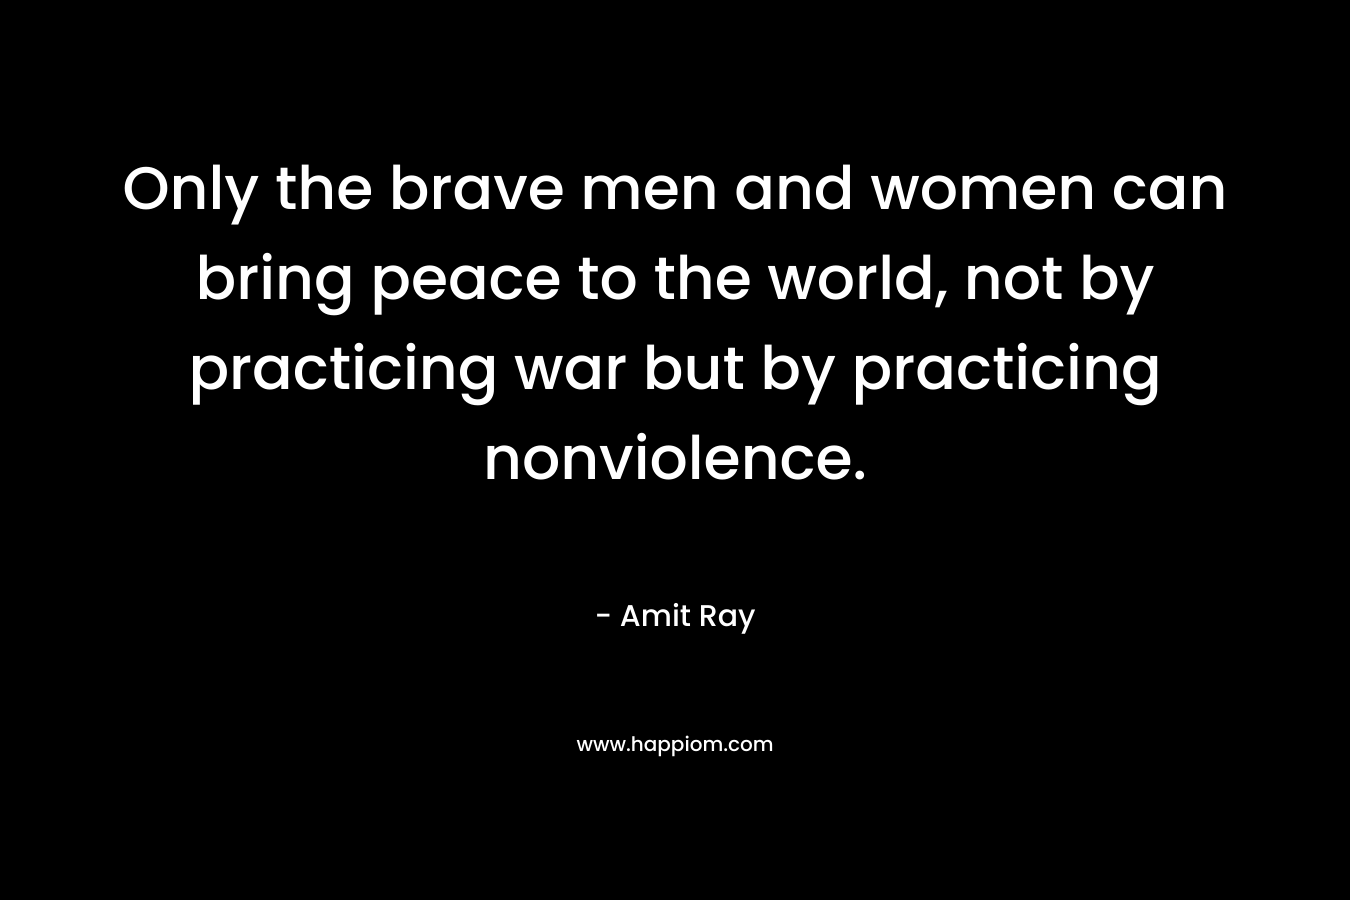 Only the brave men and women can bring peace to the world, not by practicing war but by practicing nonviolence.